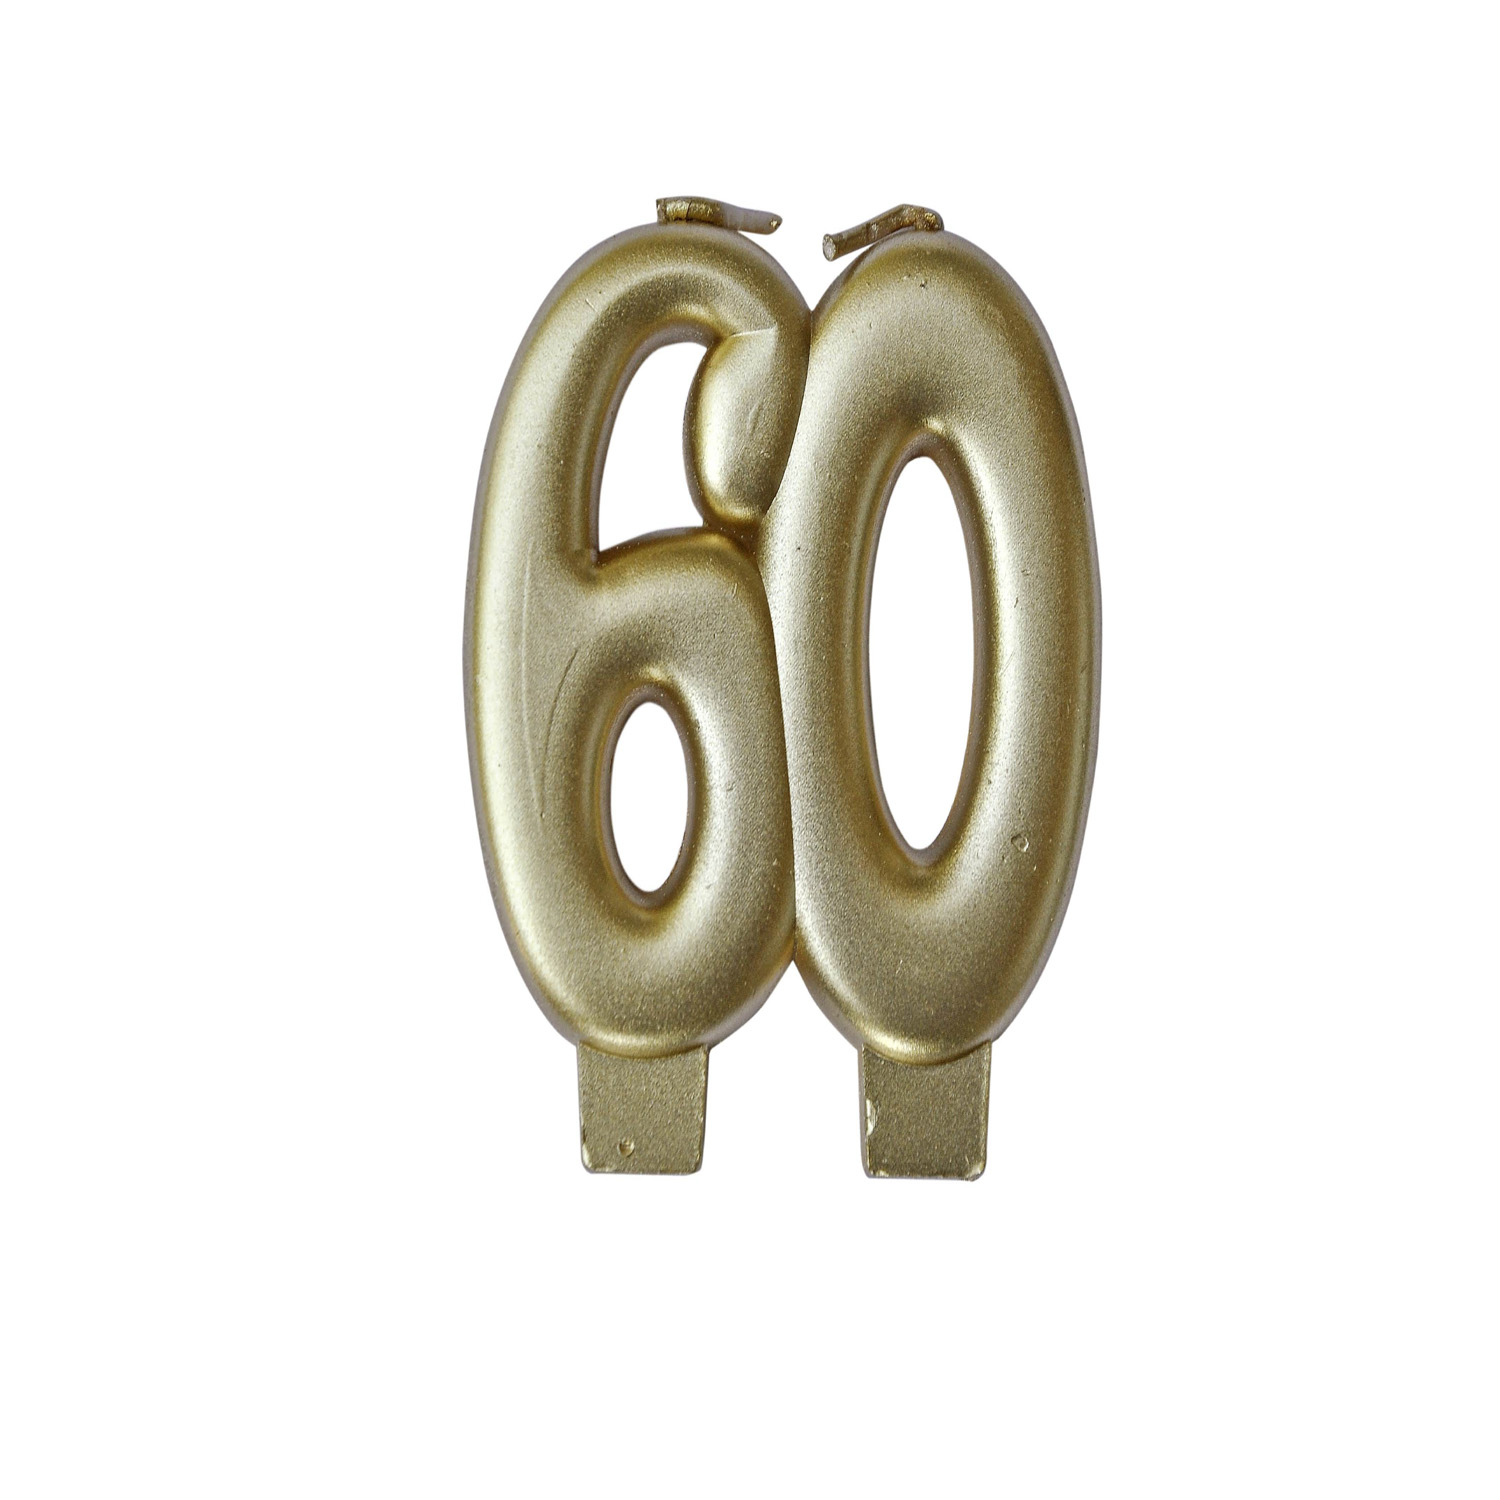 60th Birthday Golden Candle - 3"